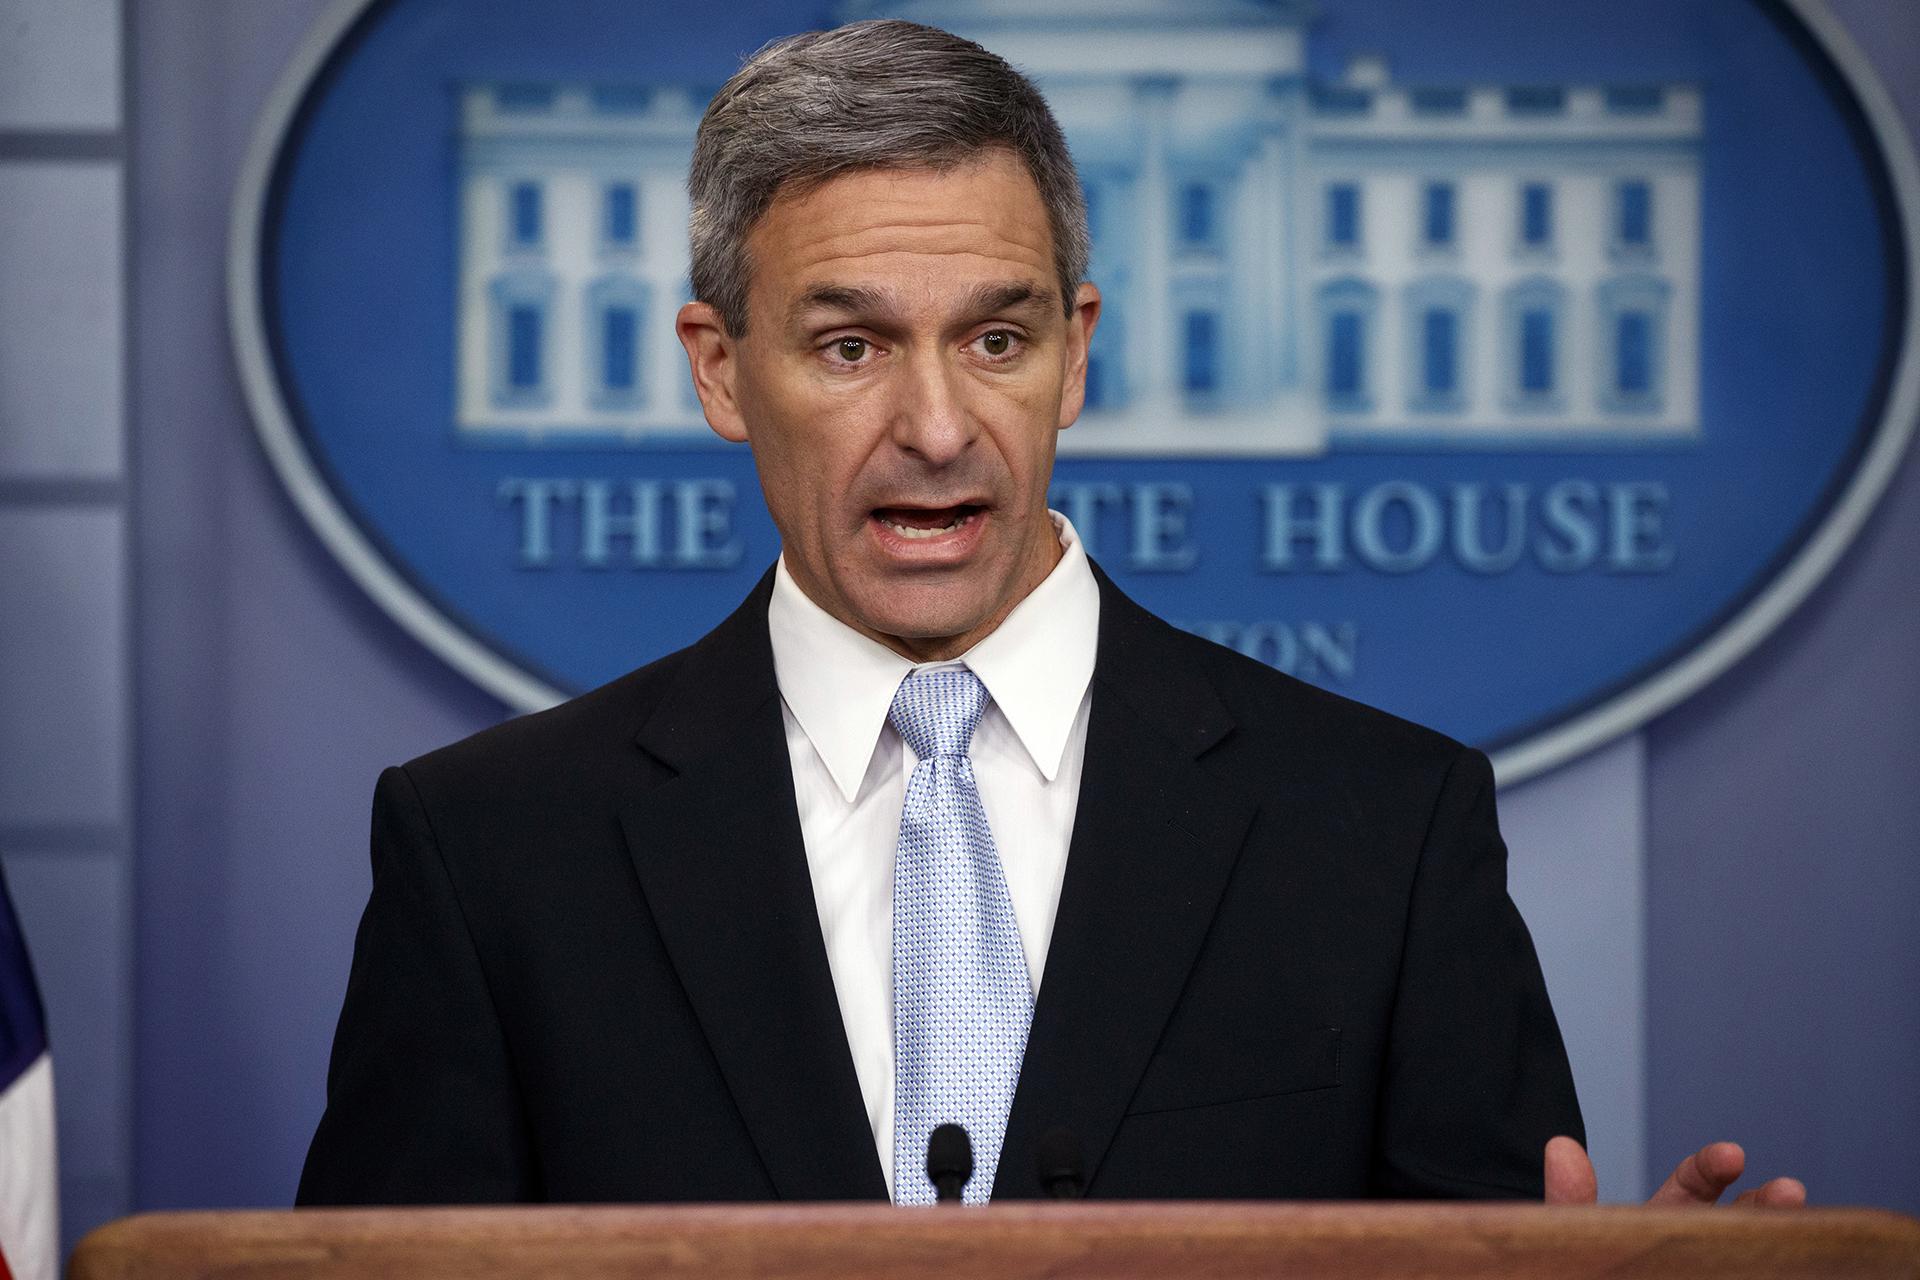 Acting Director of United States Citizenship and Immigration Services Ken Cuccinelli, speaks during a briefing at the White House, Monday, Aug. 12, 2019, in Washington. (AP Photo / Evan Vucci)